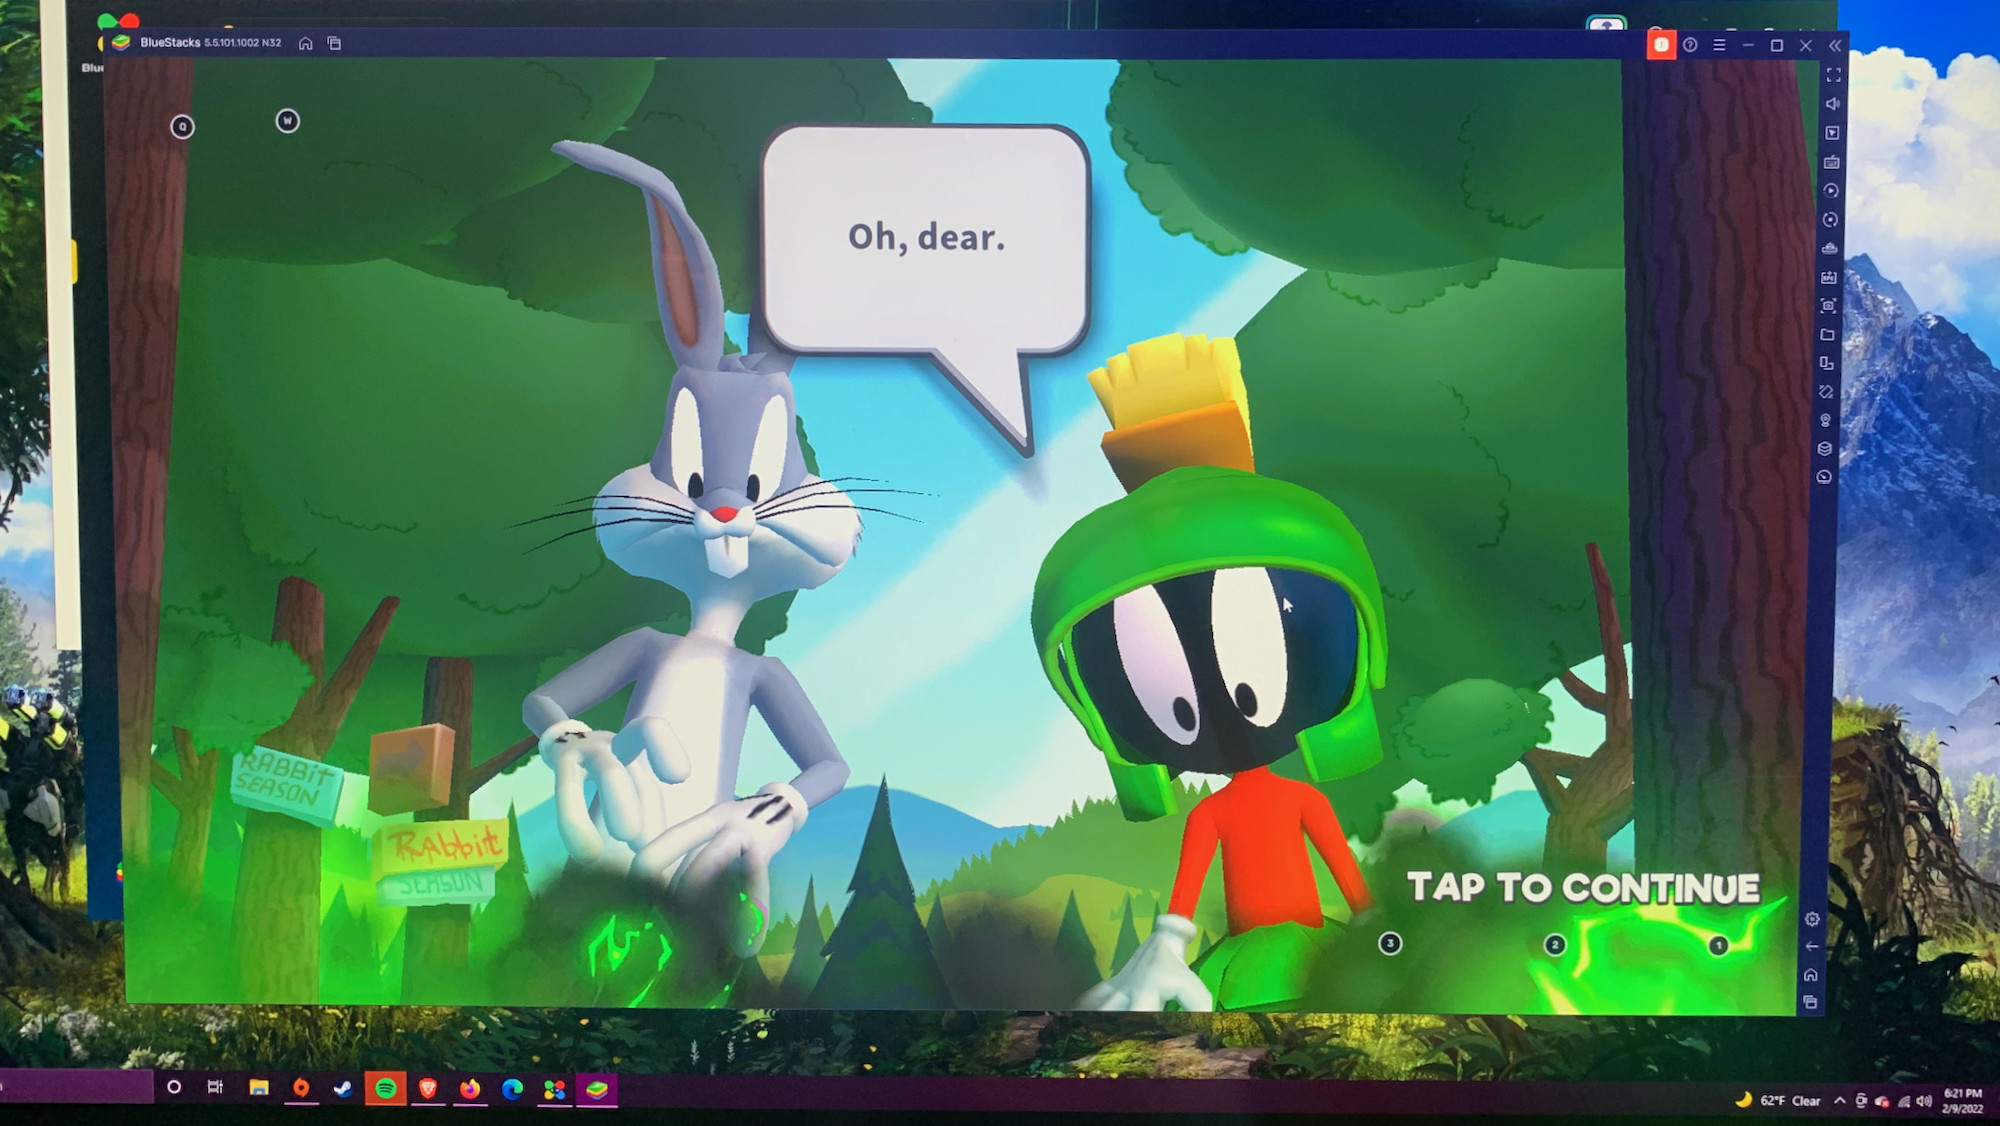 Google Play Games Beta for PC comes to India, users can now play Android  games on Windows PC - Technology News